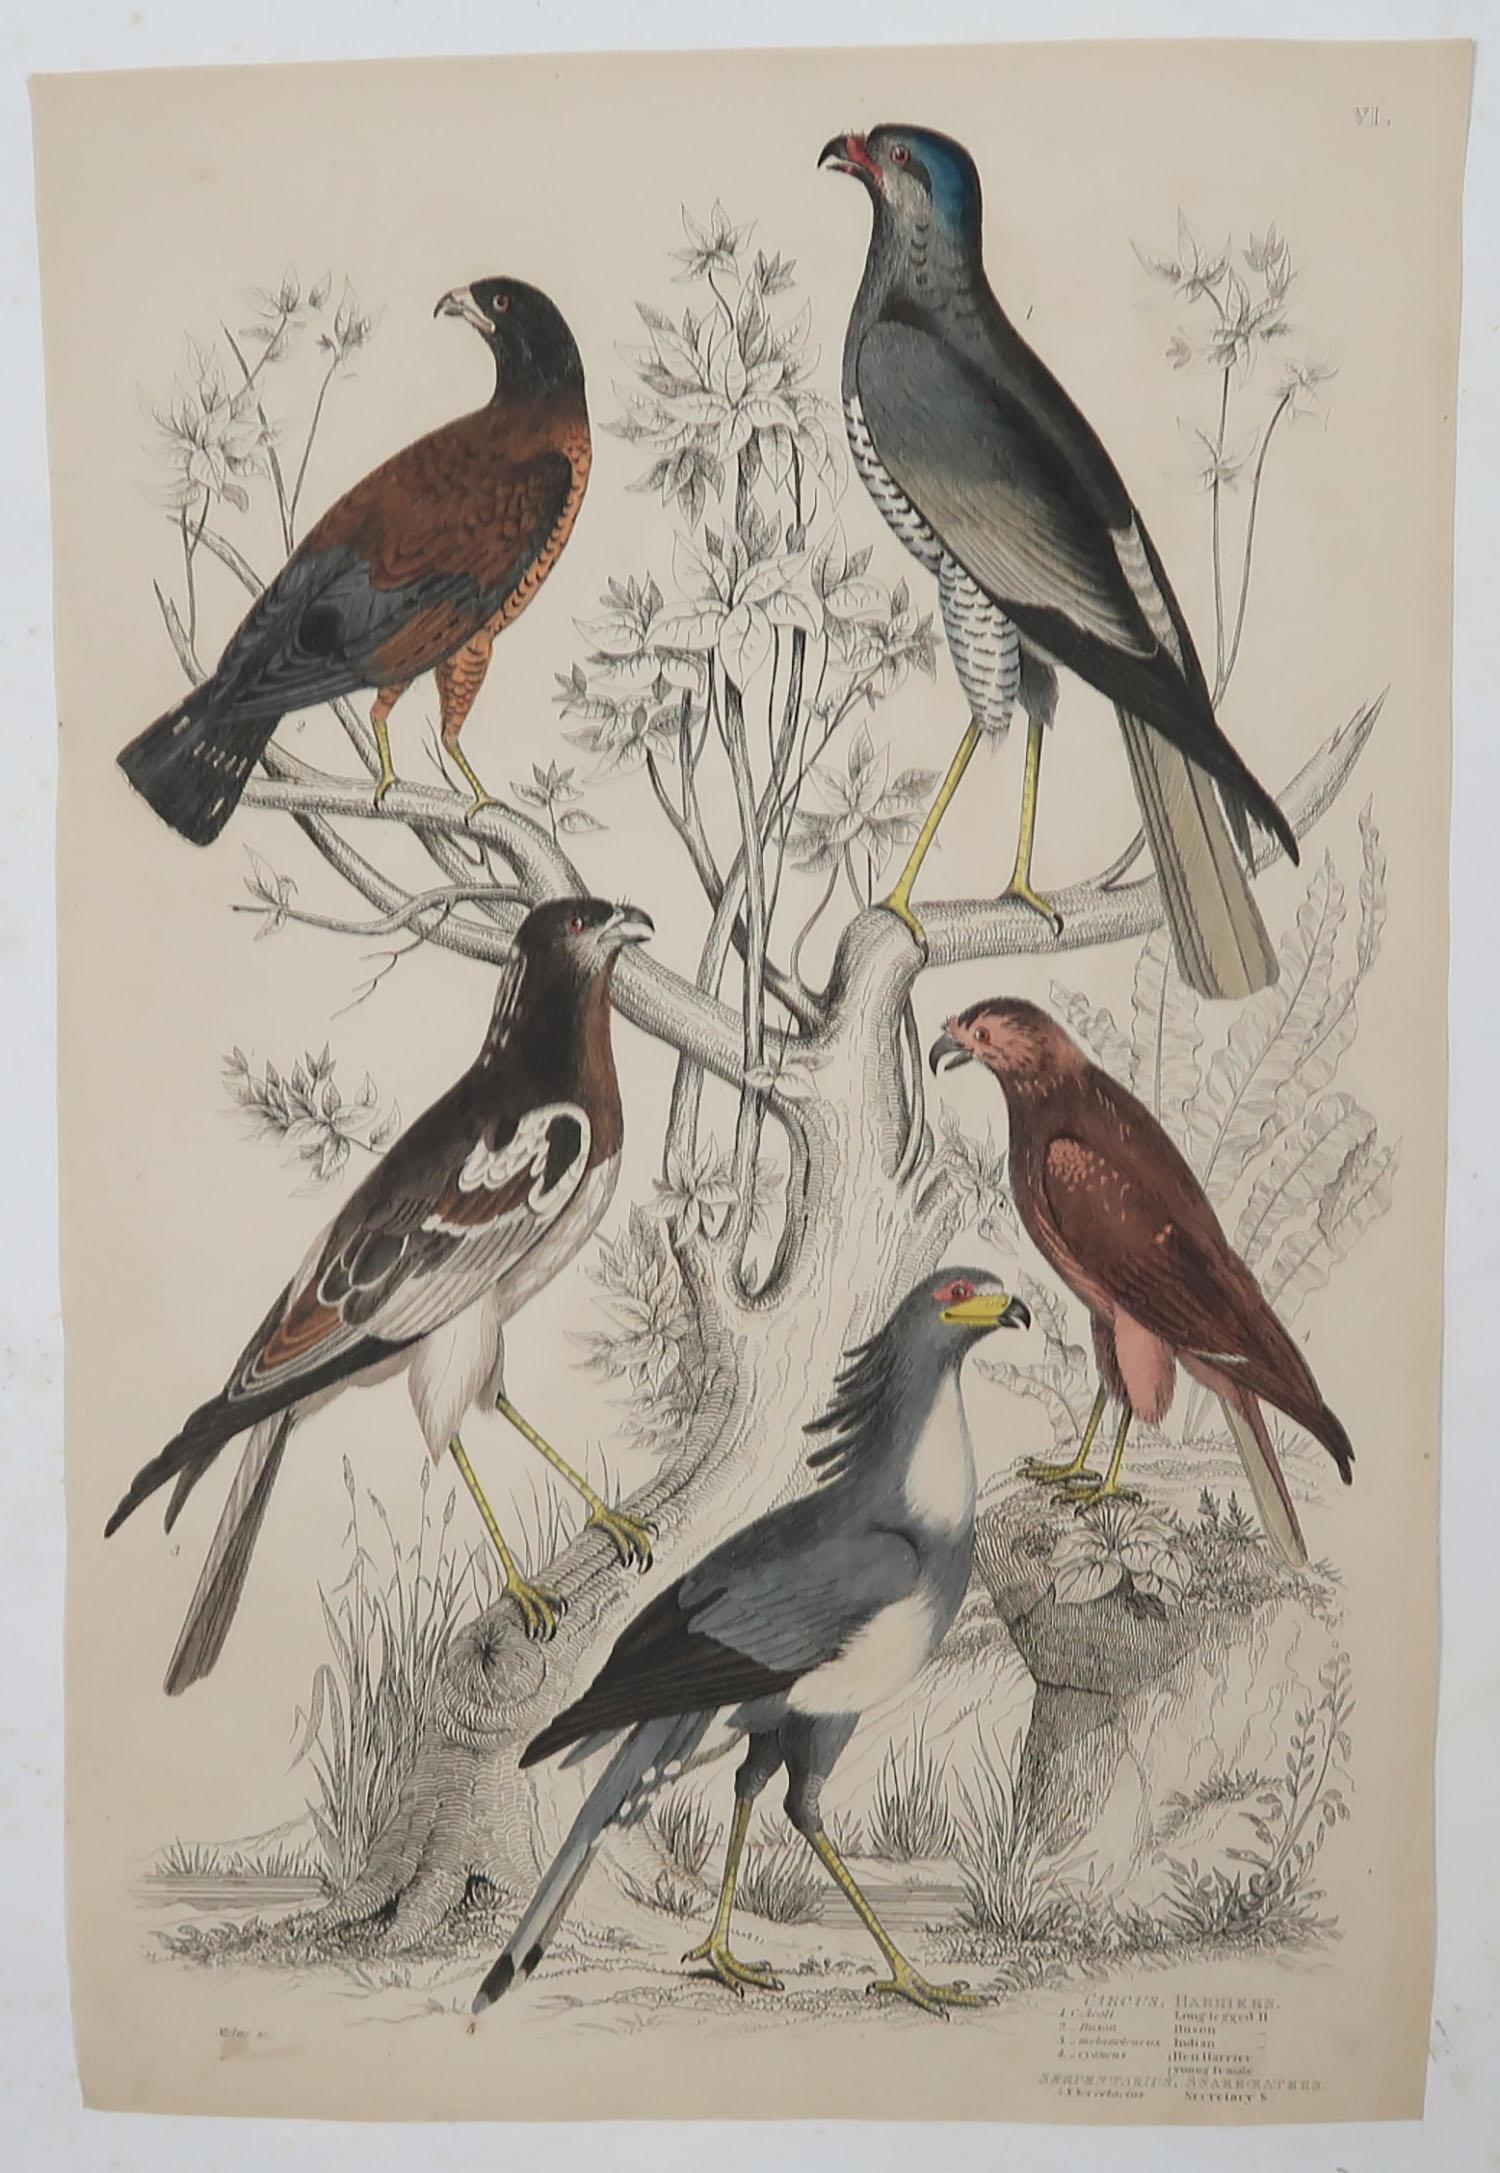 Great set of birds of prey

Lithographs after the drawings by Turvey, A. Wilson and Cpt. Brown.
 
Original color.

Unframed

A few repairs to minor edge tears

The measurement given below is for one print.